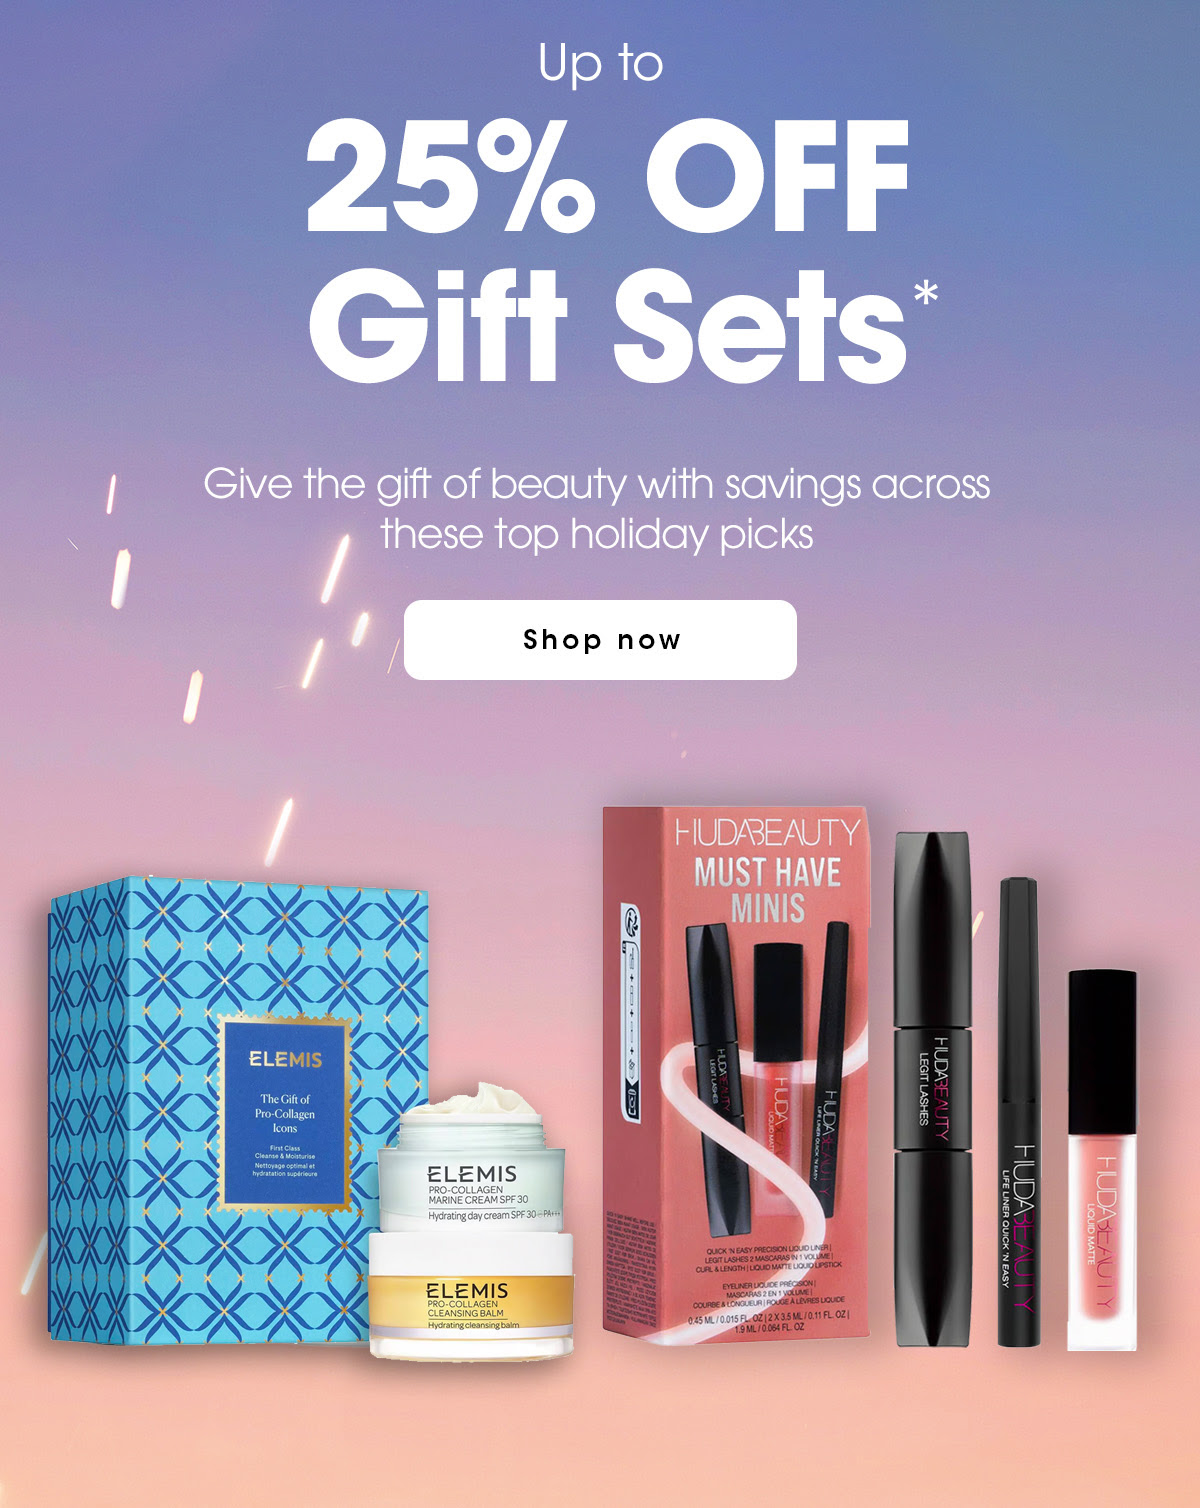 Up to 25% off selected Gift Sets at Sephora UK